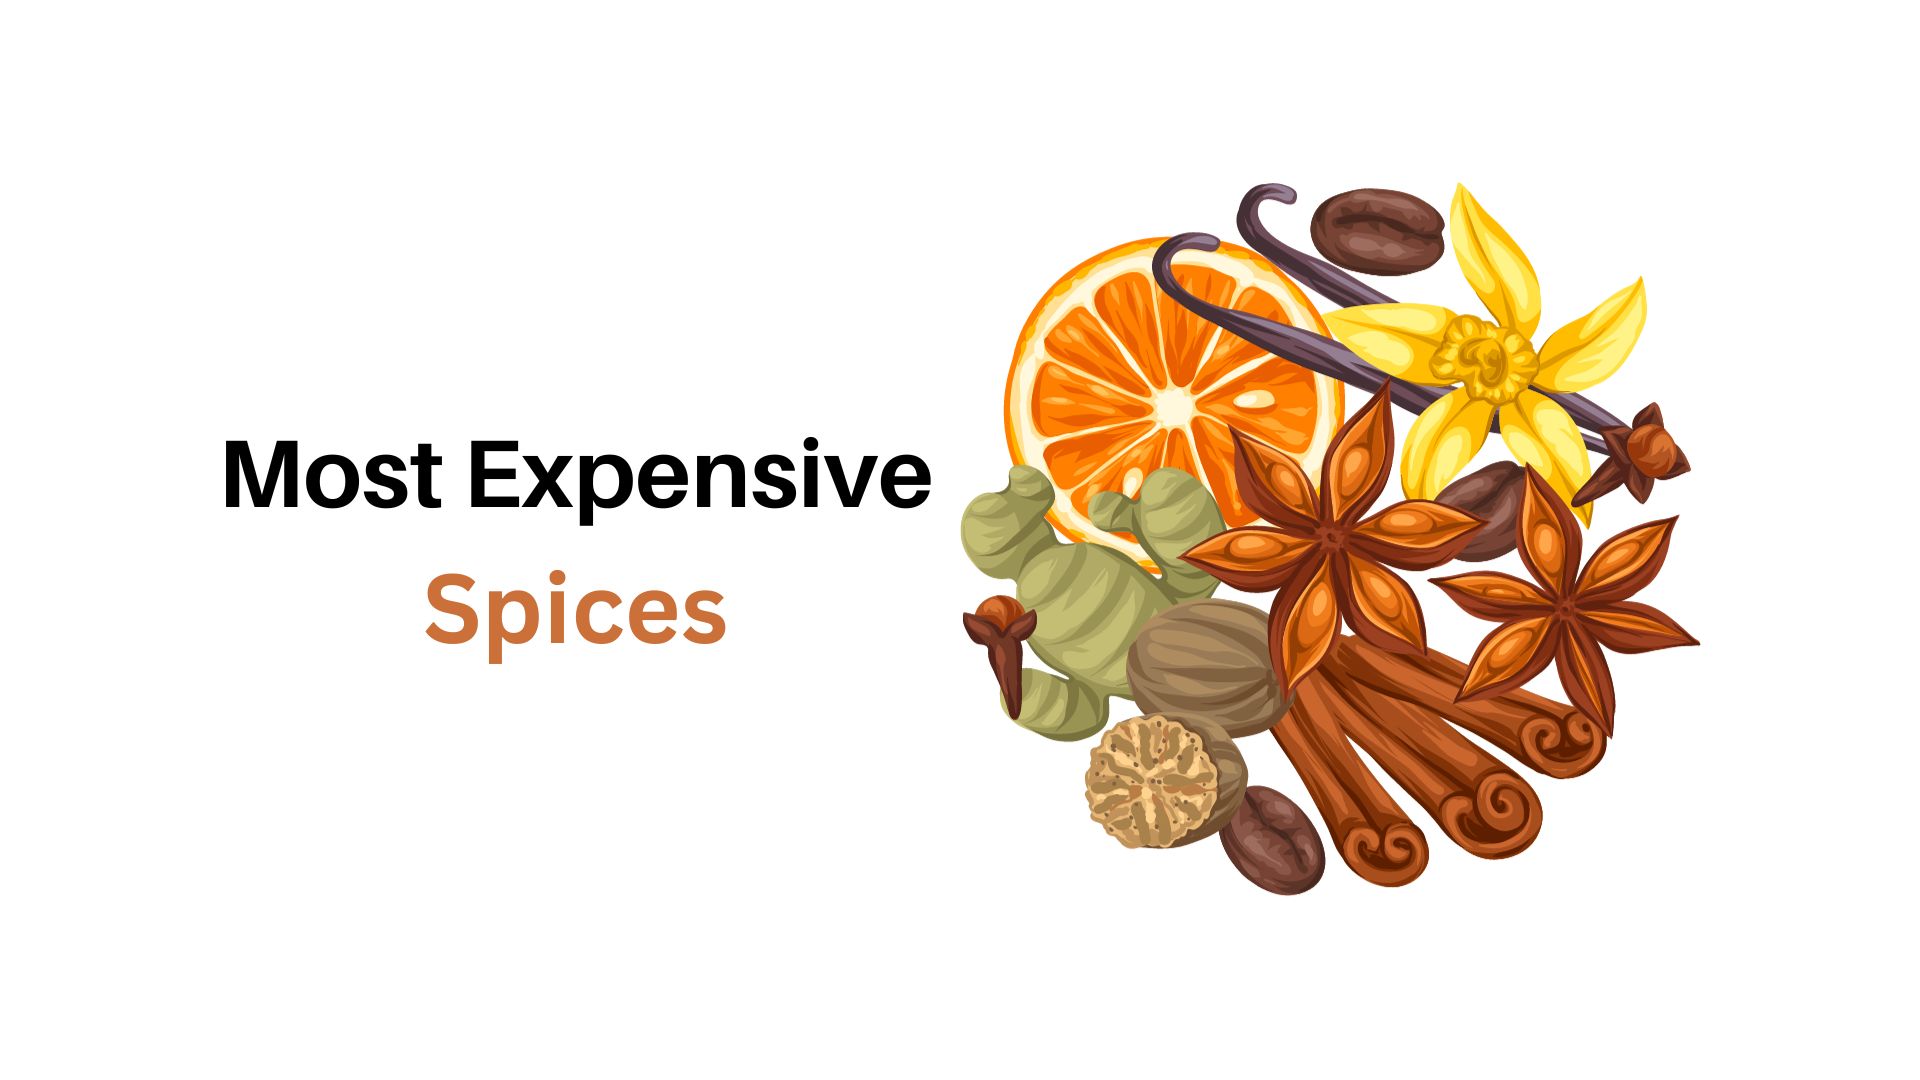 Top 10 Most Expensive Spices In The World